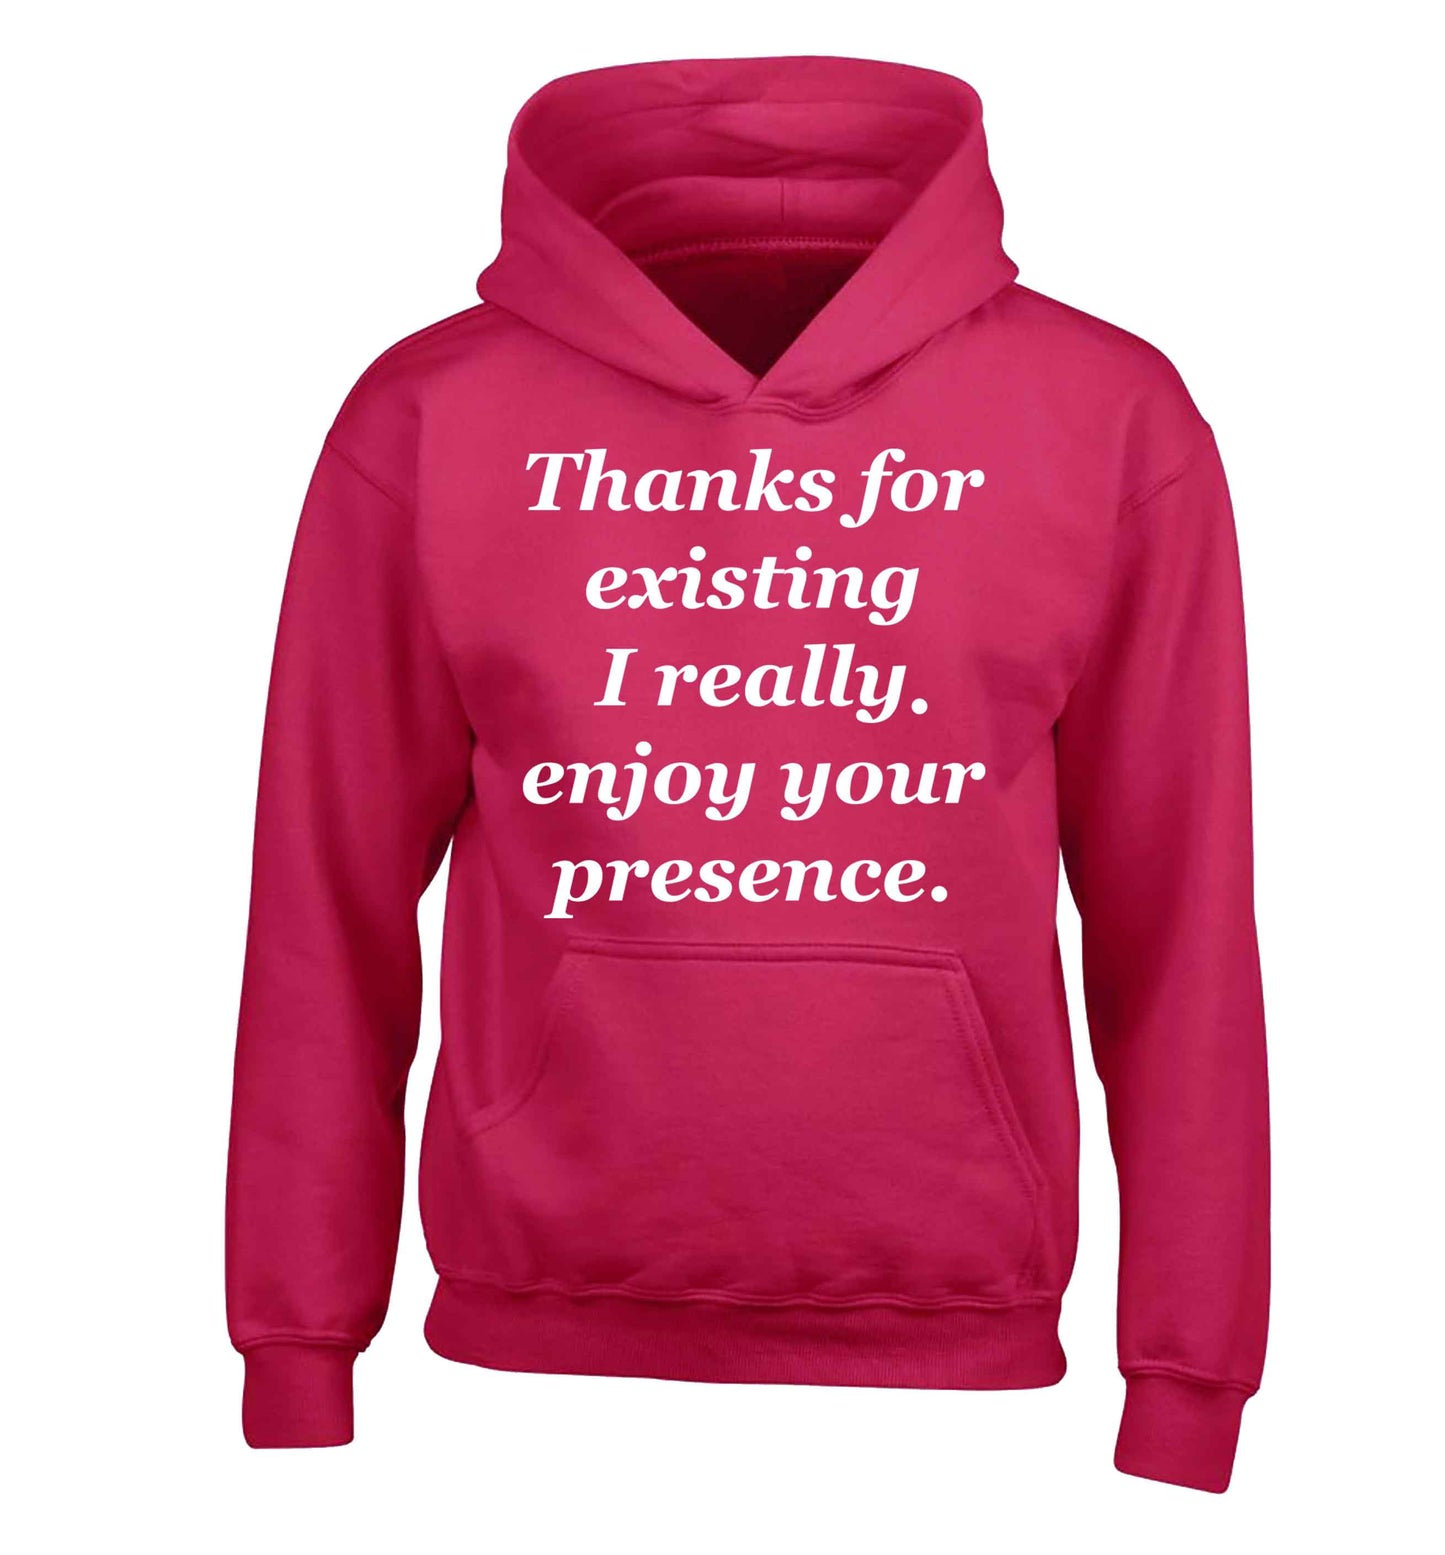 Thanks for existing I really enjoy your presence children's pink hoodie 12-13 Years